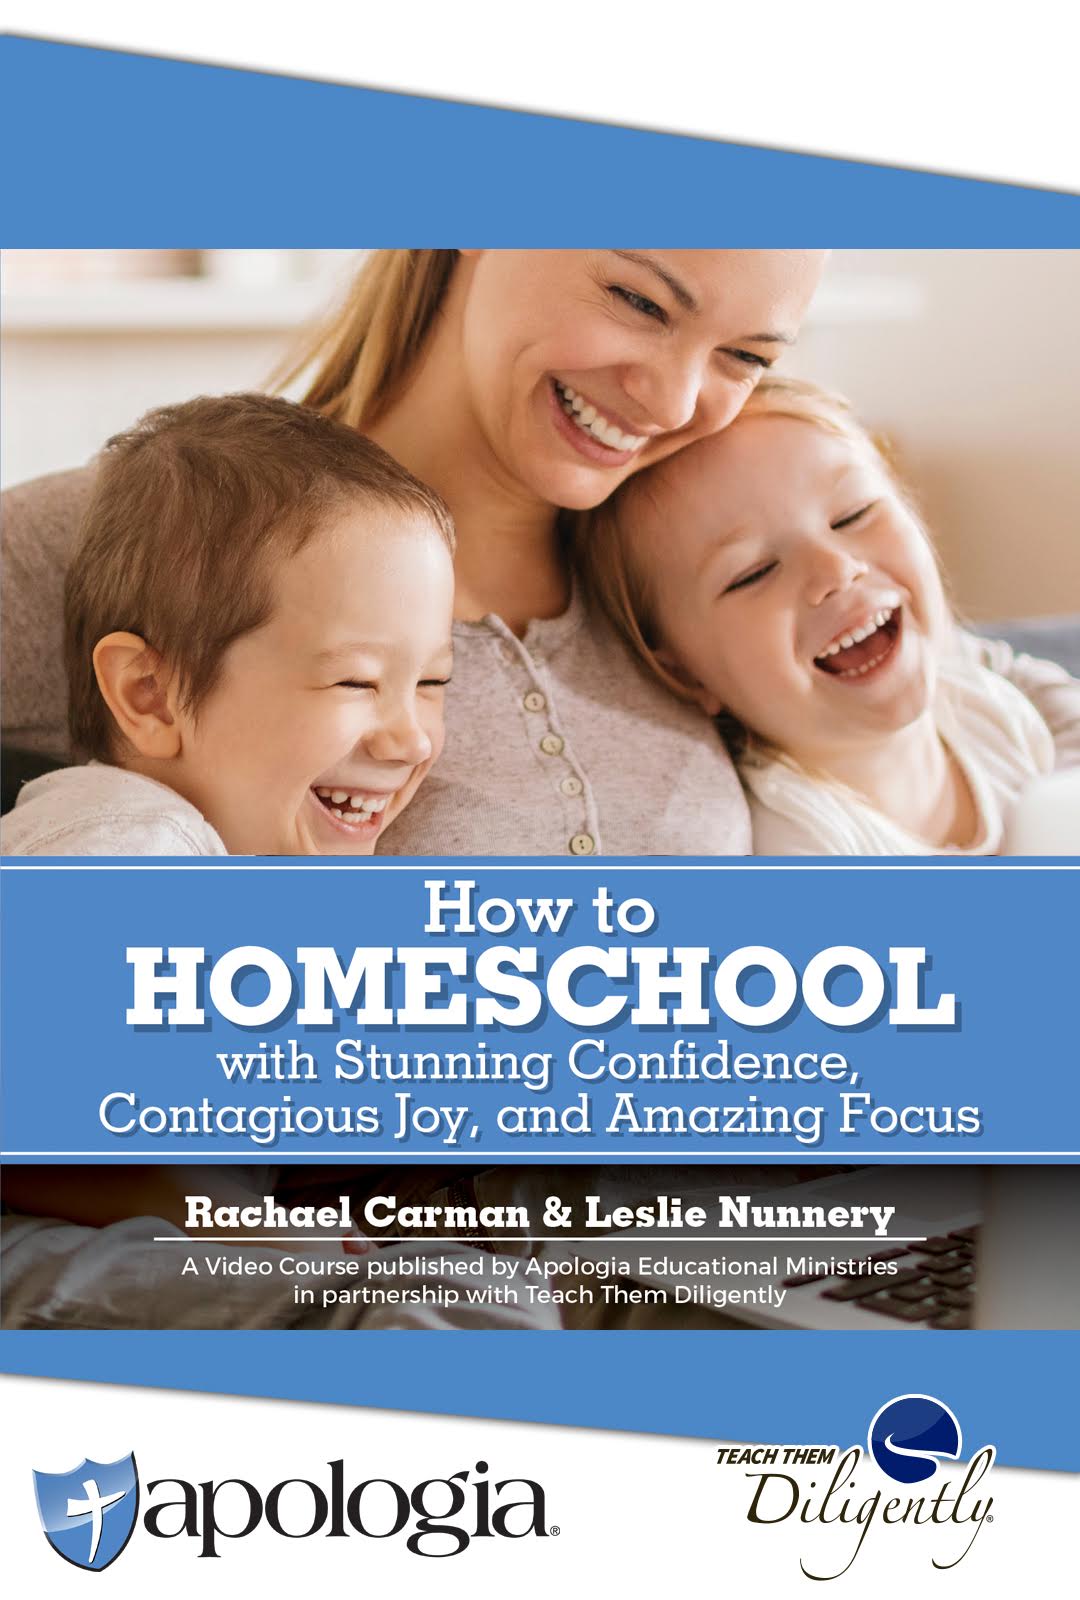 How to Homeschool With Confidence